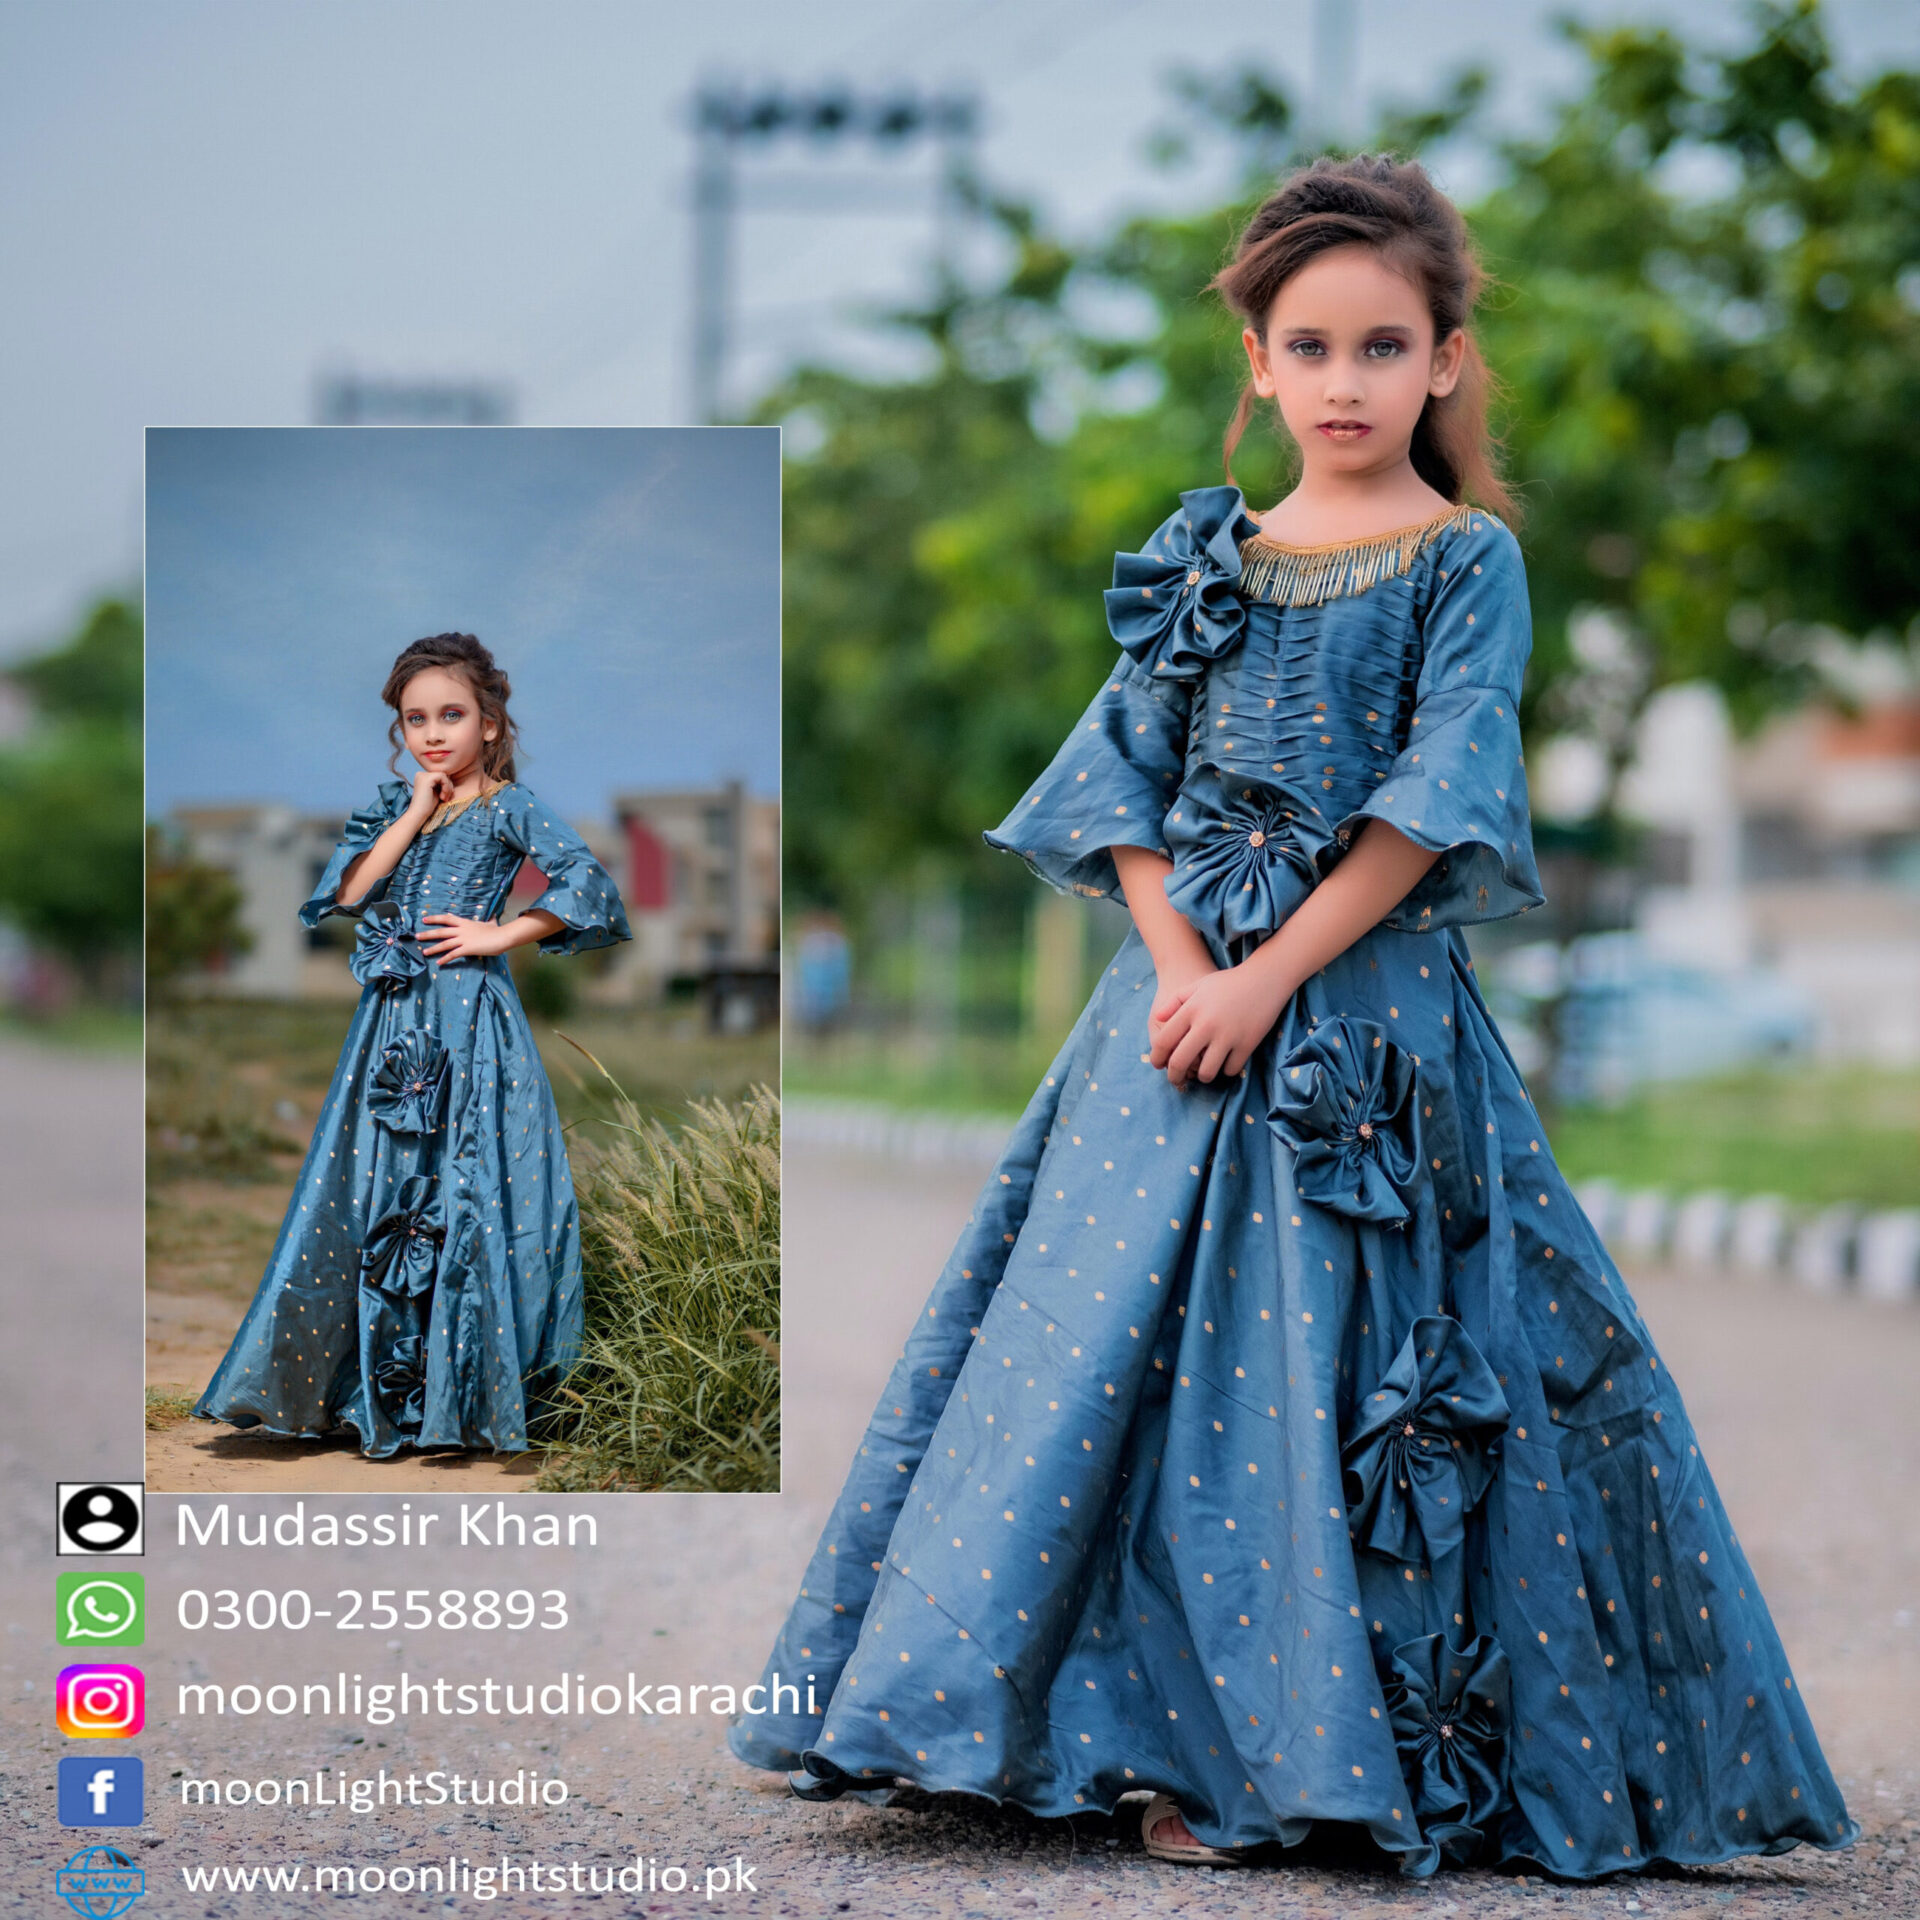 Best Birthday. Best wedding. Top Photographer in Karachi: Wedding Portrait and Aerial Photography Specialists, cinematic video by Moon Light Studio